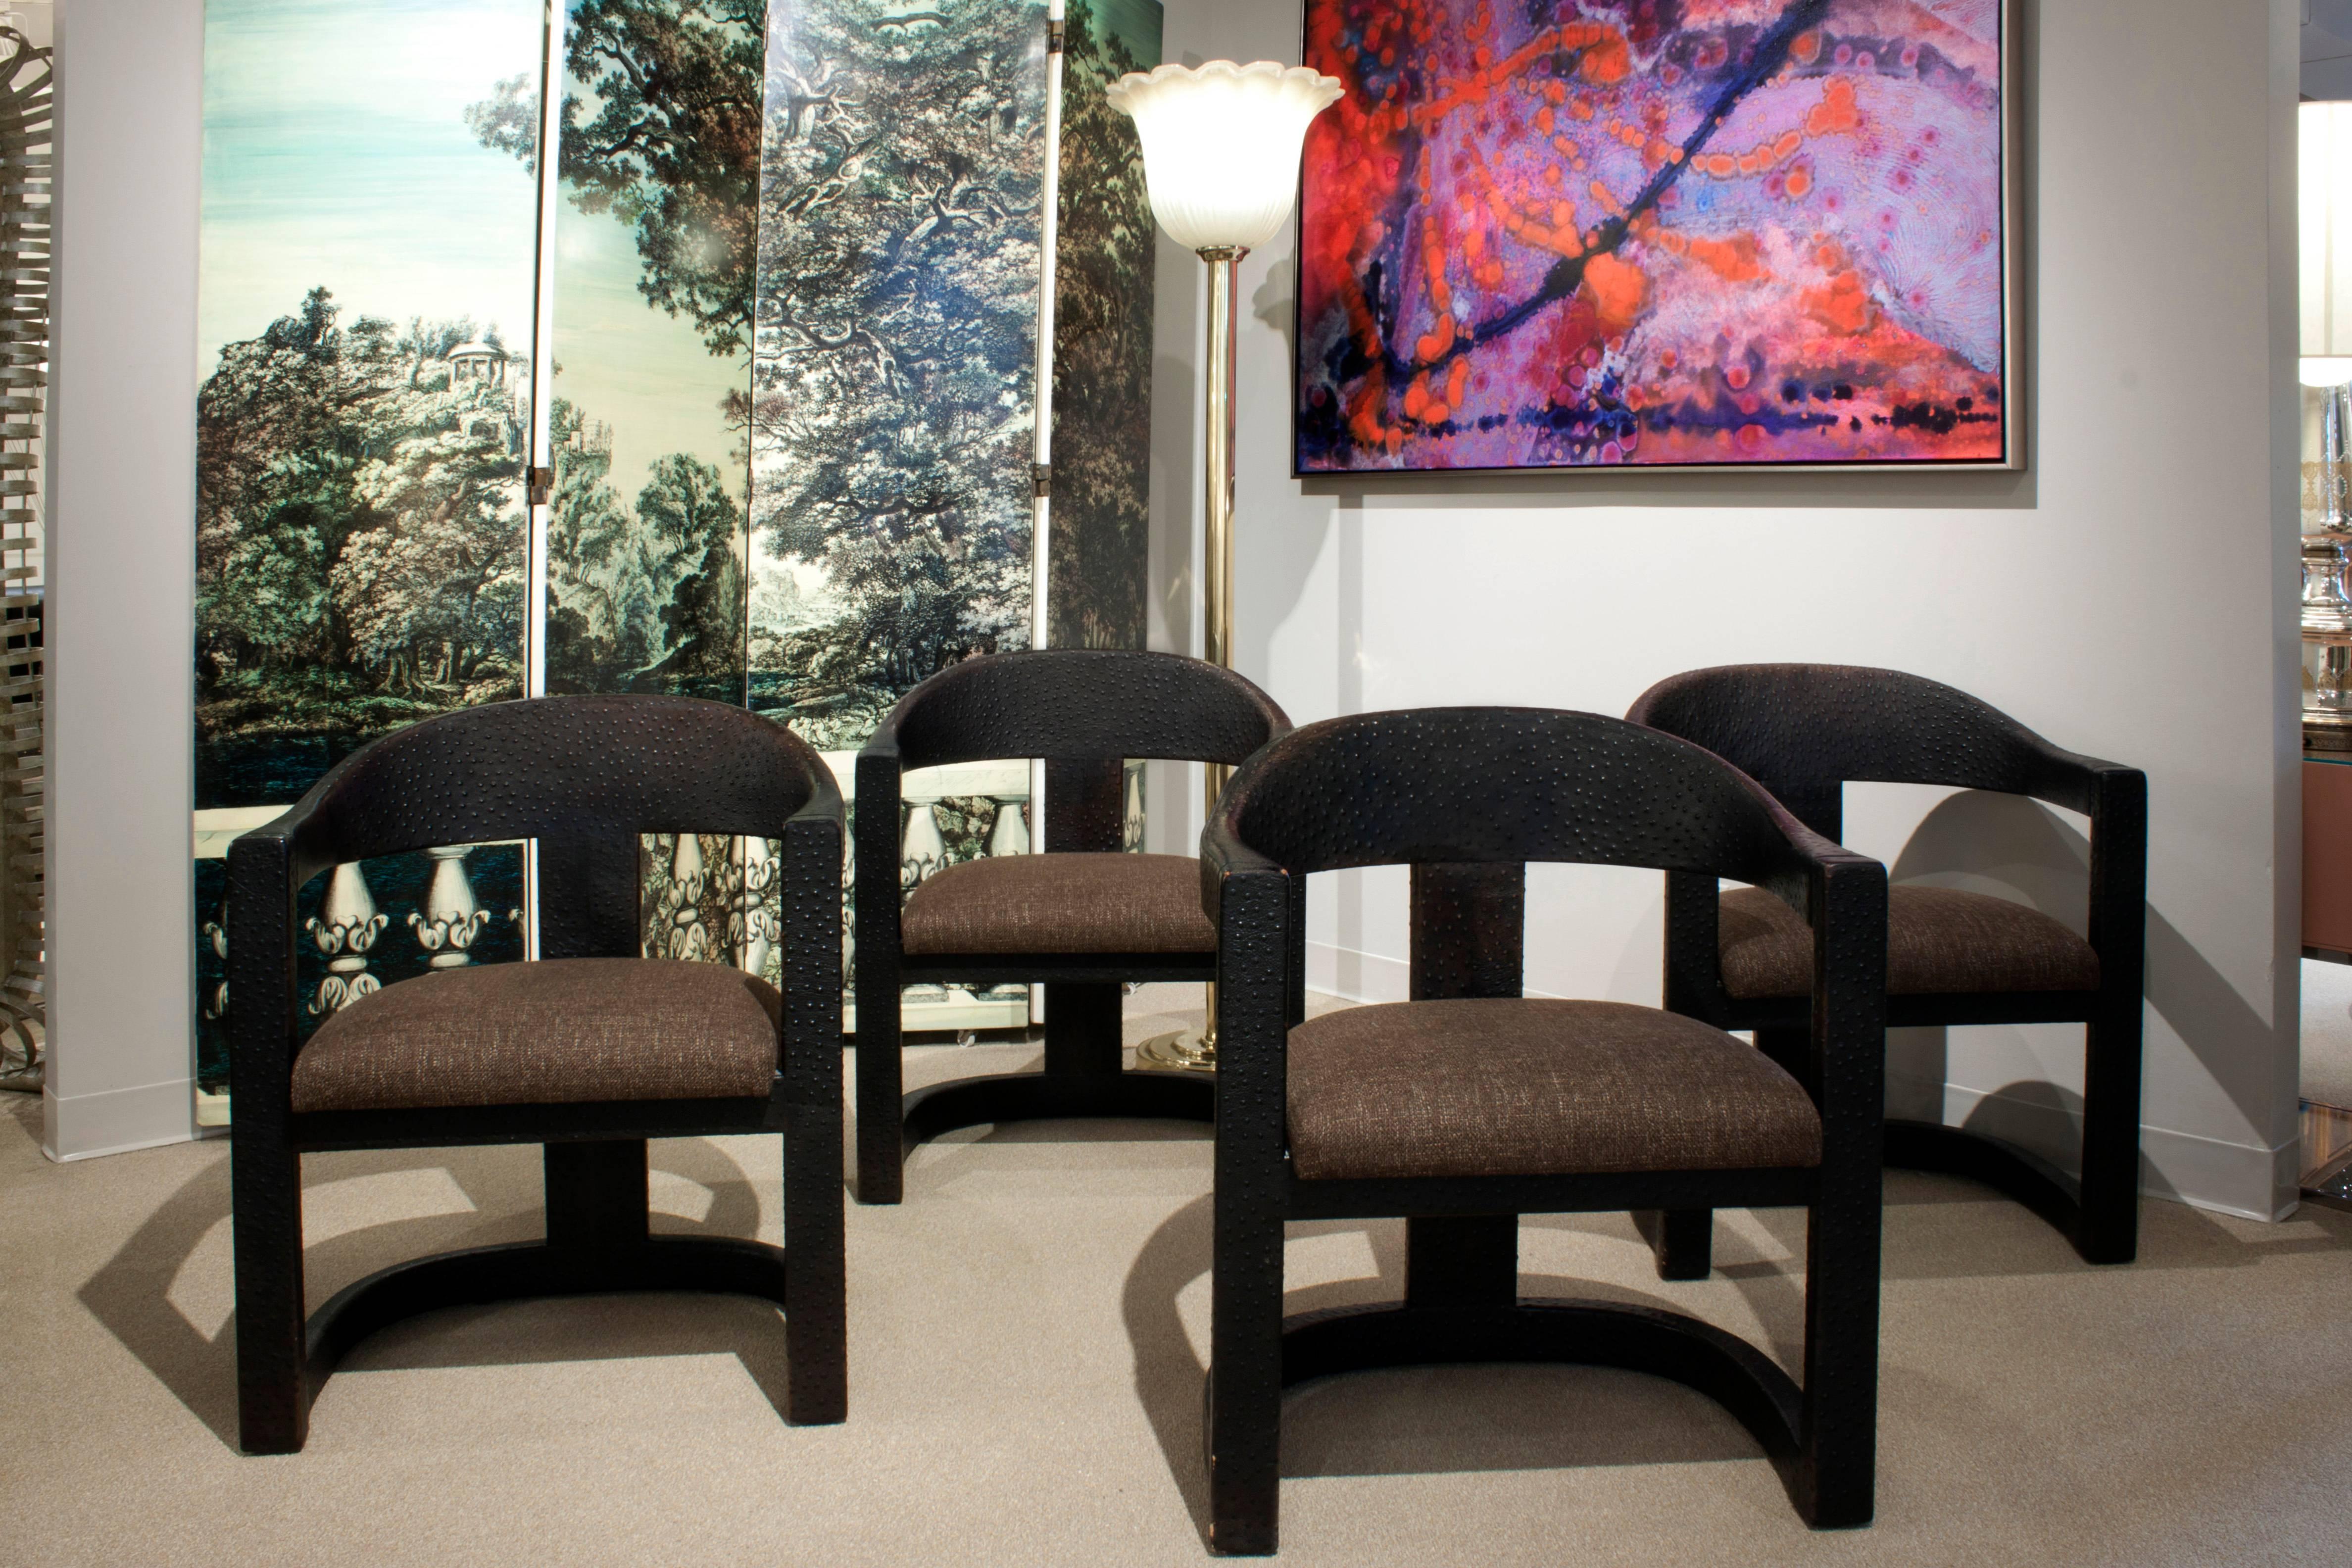 Ostrich Leather Karl Springer Set of Four Ostrich Onassis Chairs, 1984